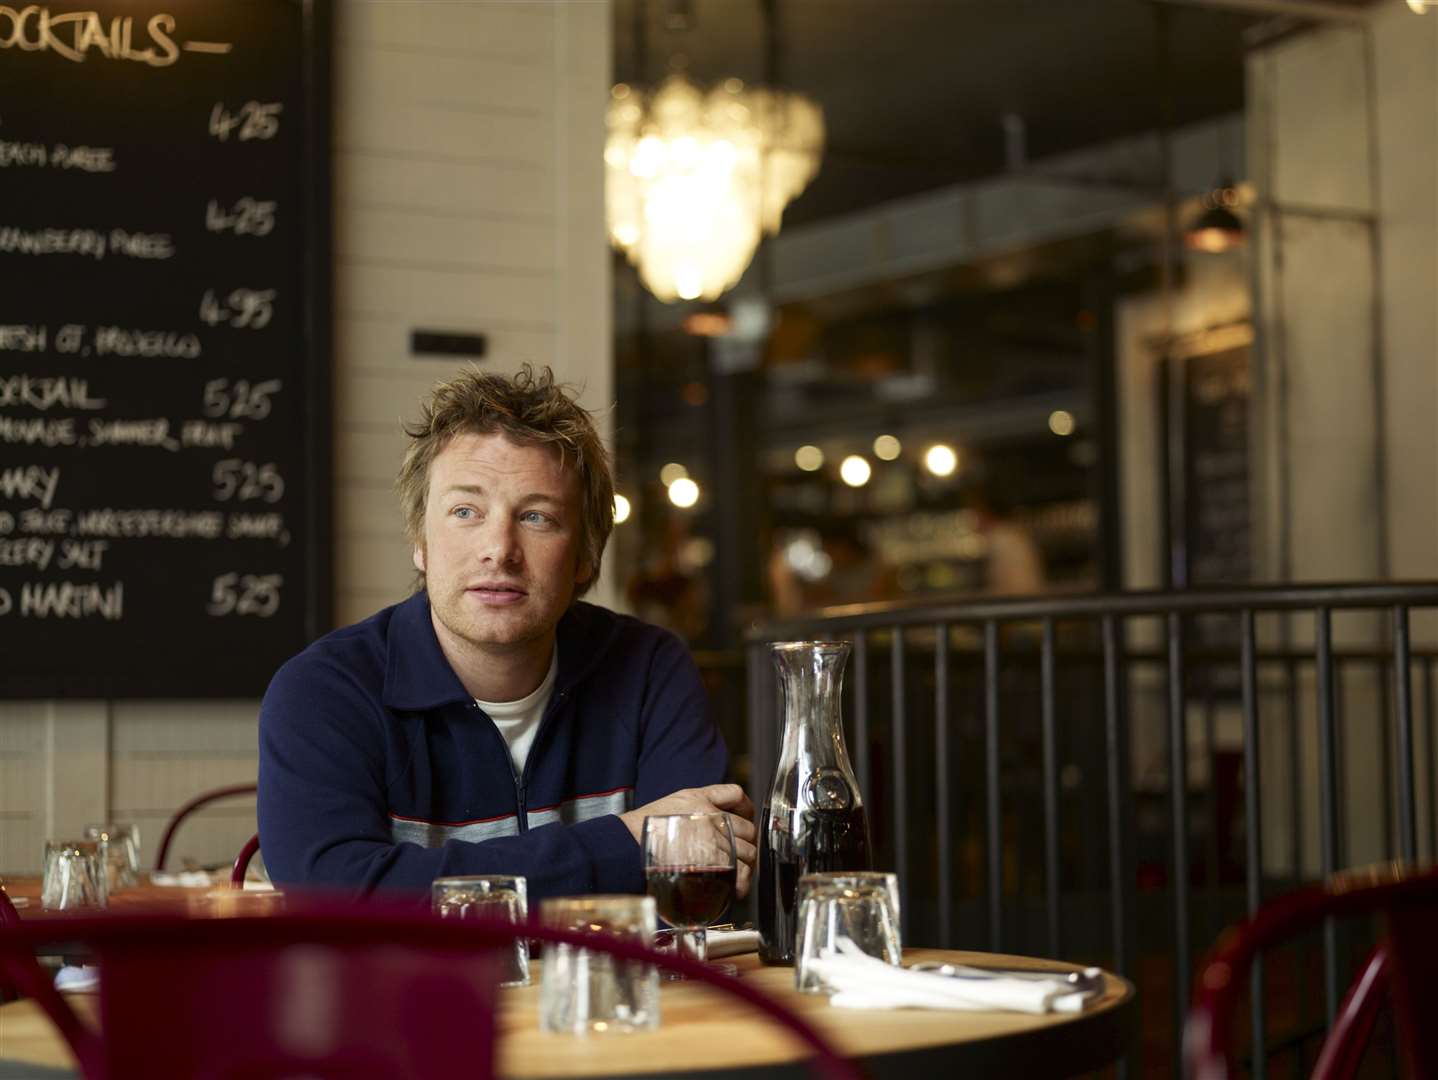 Jamie Oliver pulled the plug on his string of restaurants earlier this week